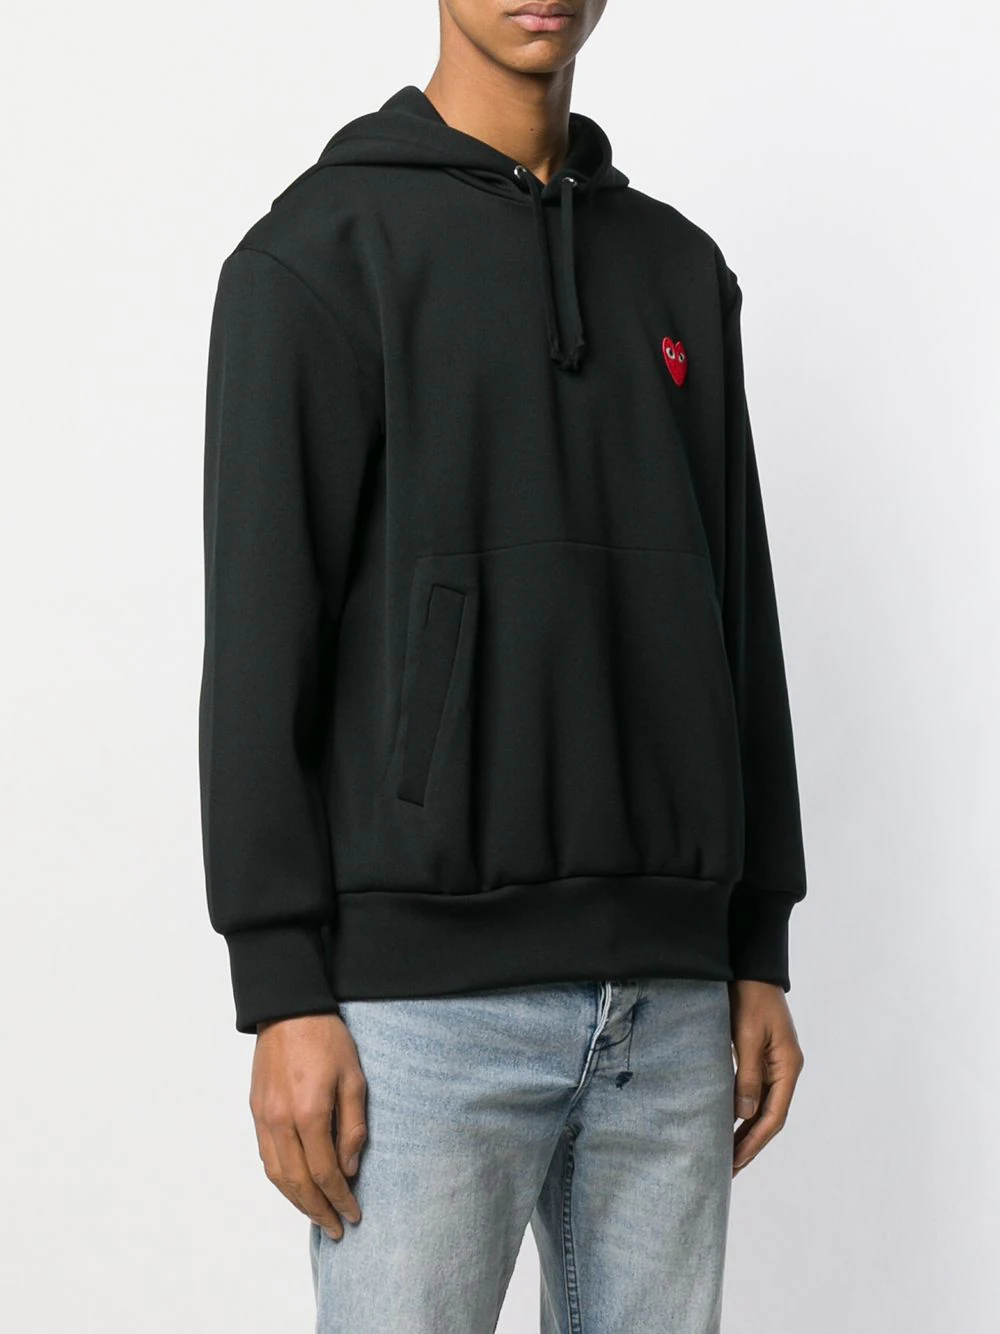 Comme des Garcons Play Red Heart Hoodie Black Men's - US